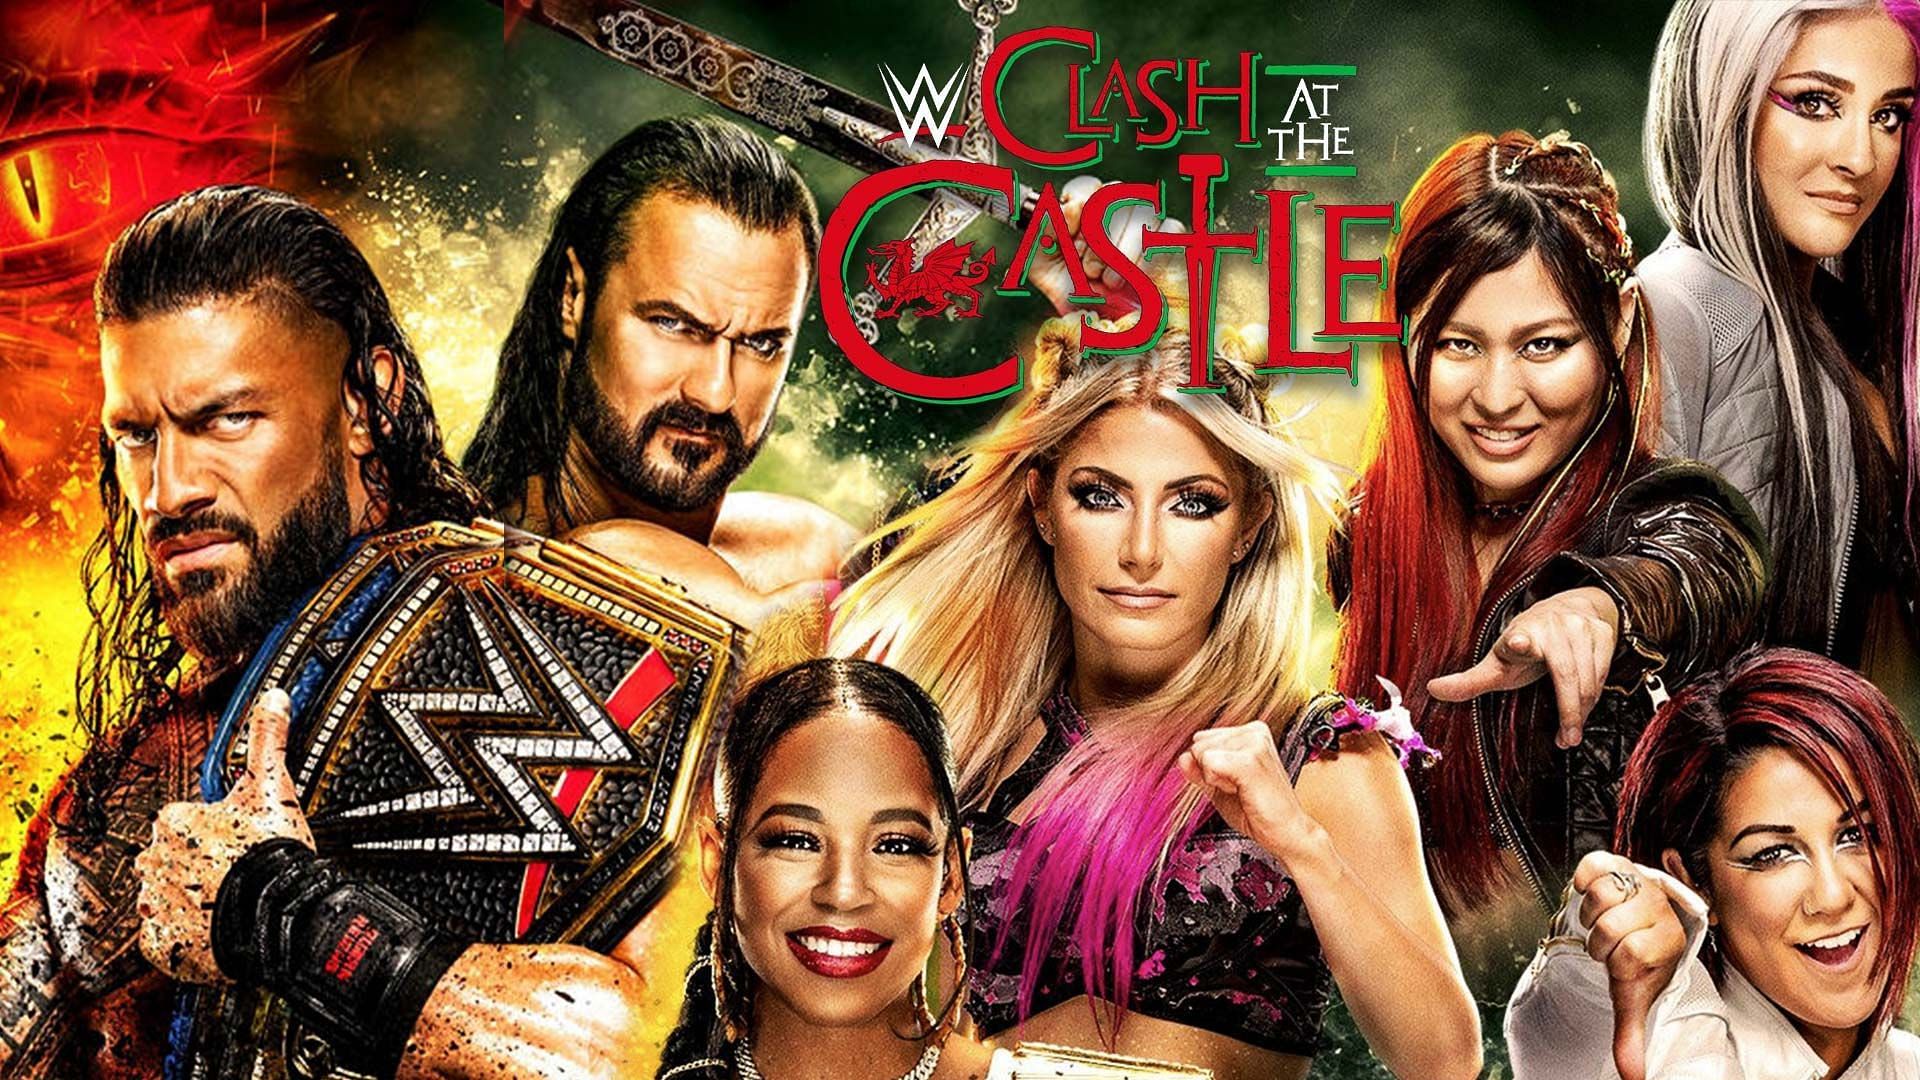 WWE Clash at the Castle Takes Place on Saturday, September 3rd